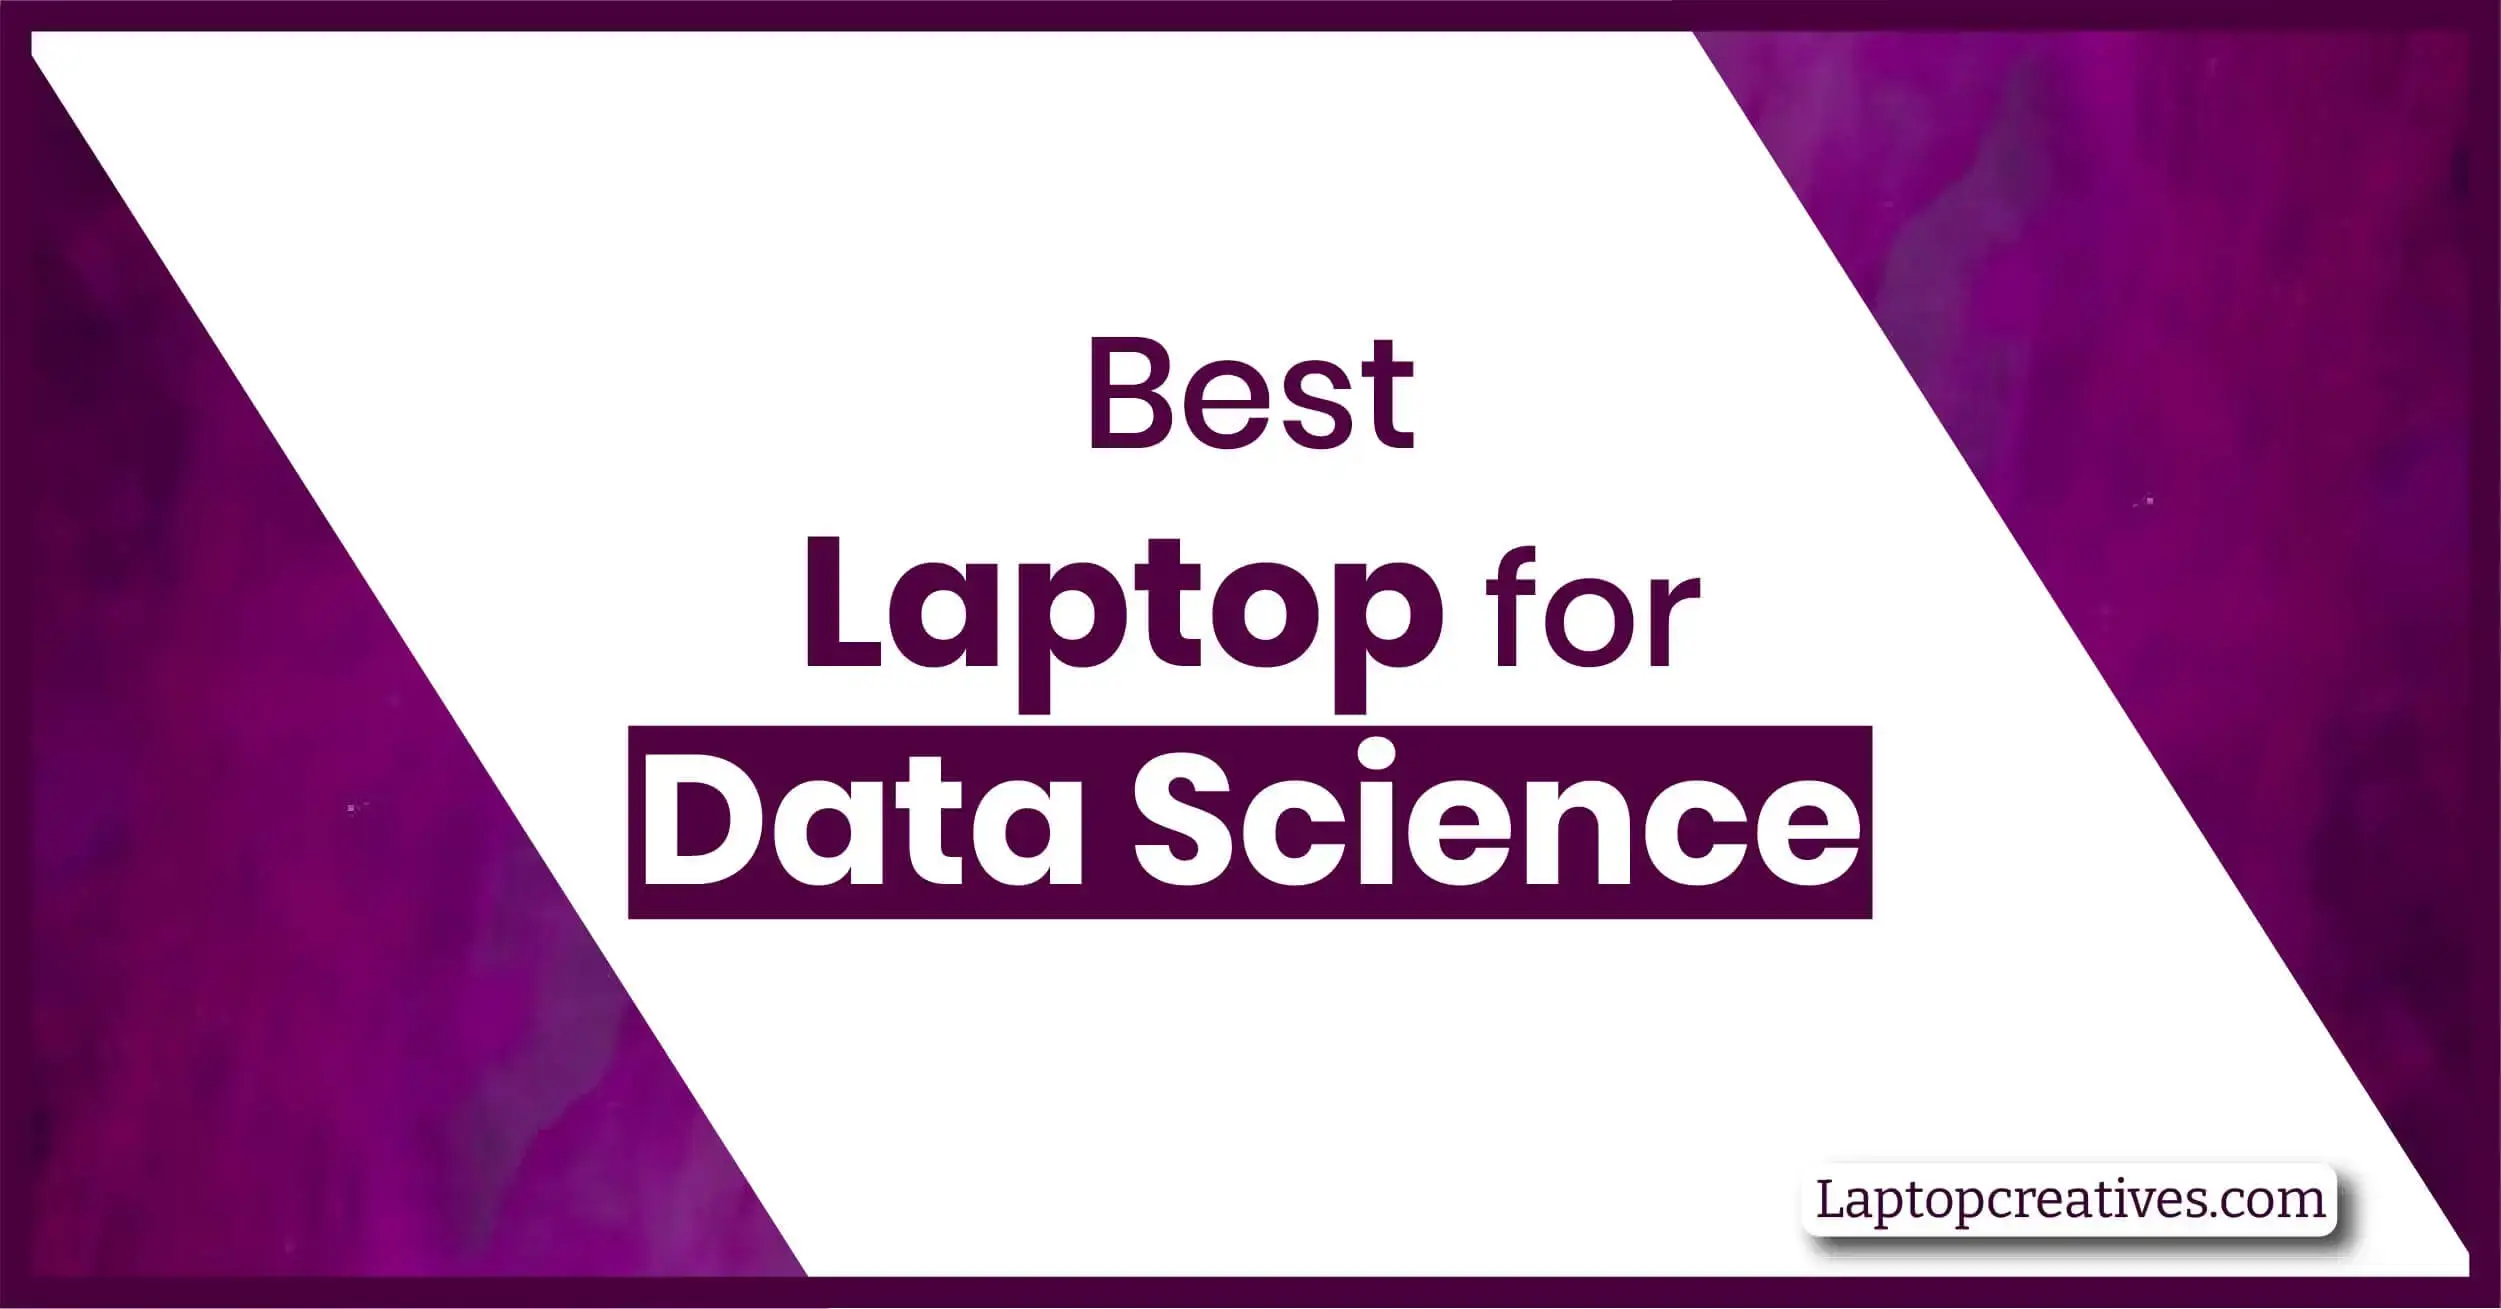 Best Laptop for Data Science